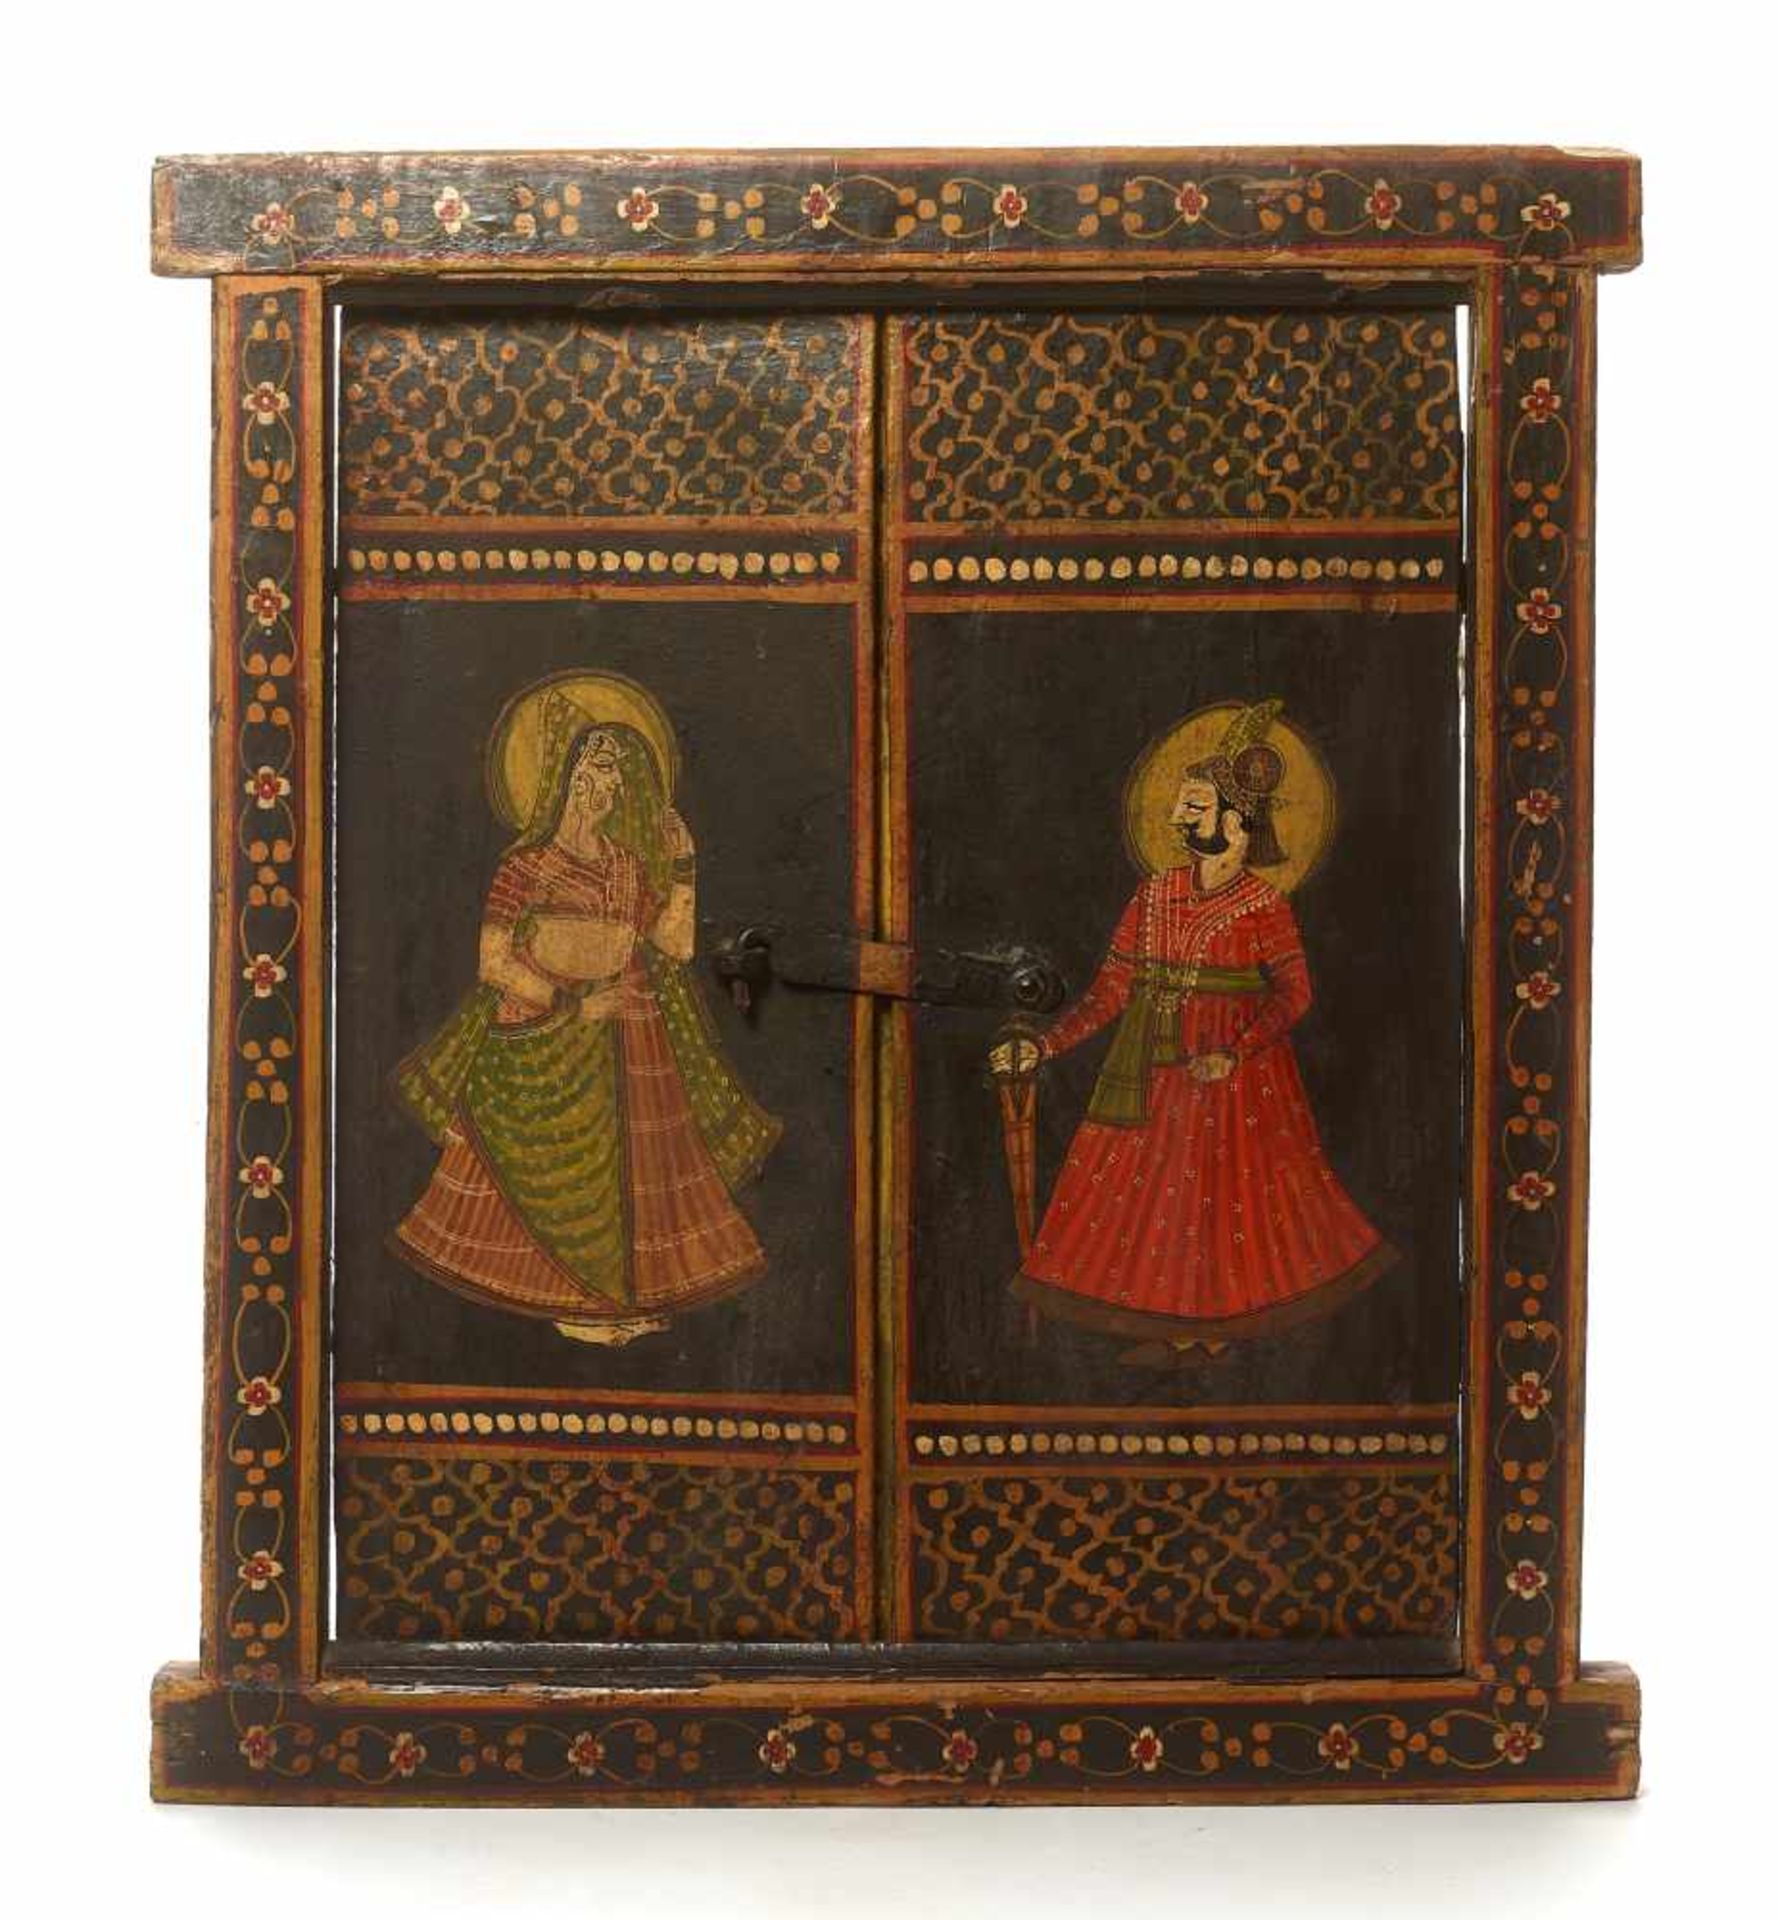 A DOUBLE-FOLDING WOODEN WINDOW - INDIA, 19TH CENTURYIndia, late 19th centuryPainted wood and